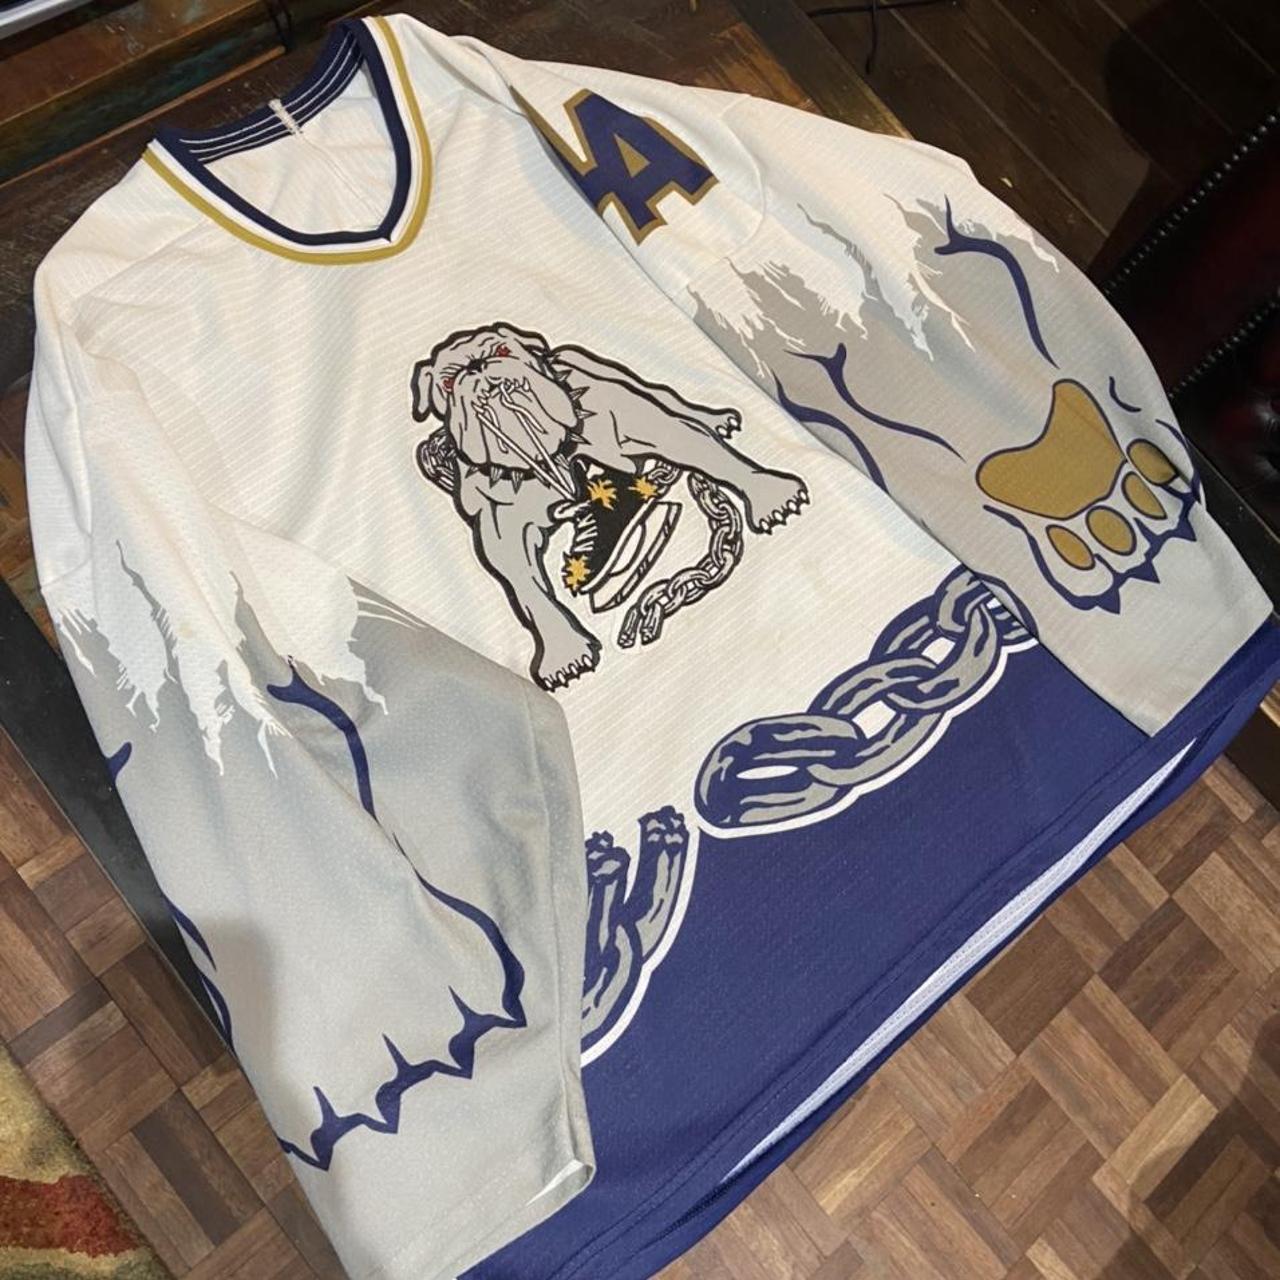 Long Beach Ice Dogs IHL Jersey size 48/XL – Mr. Throwback NYC